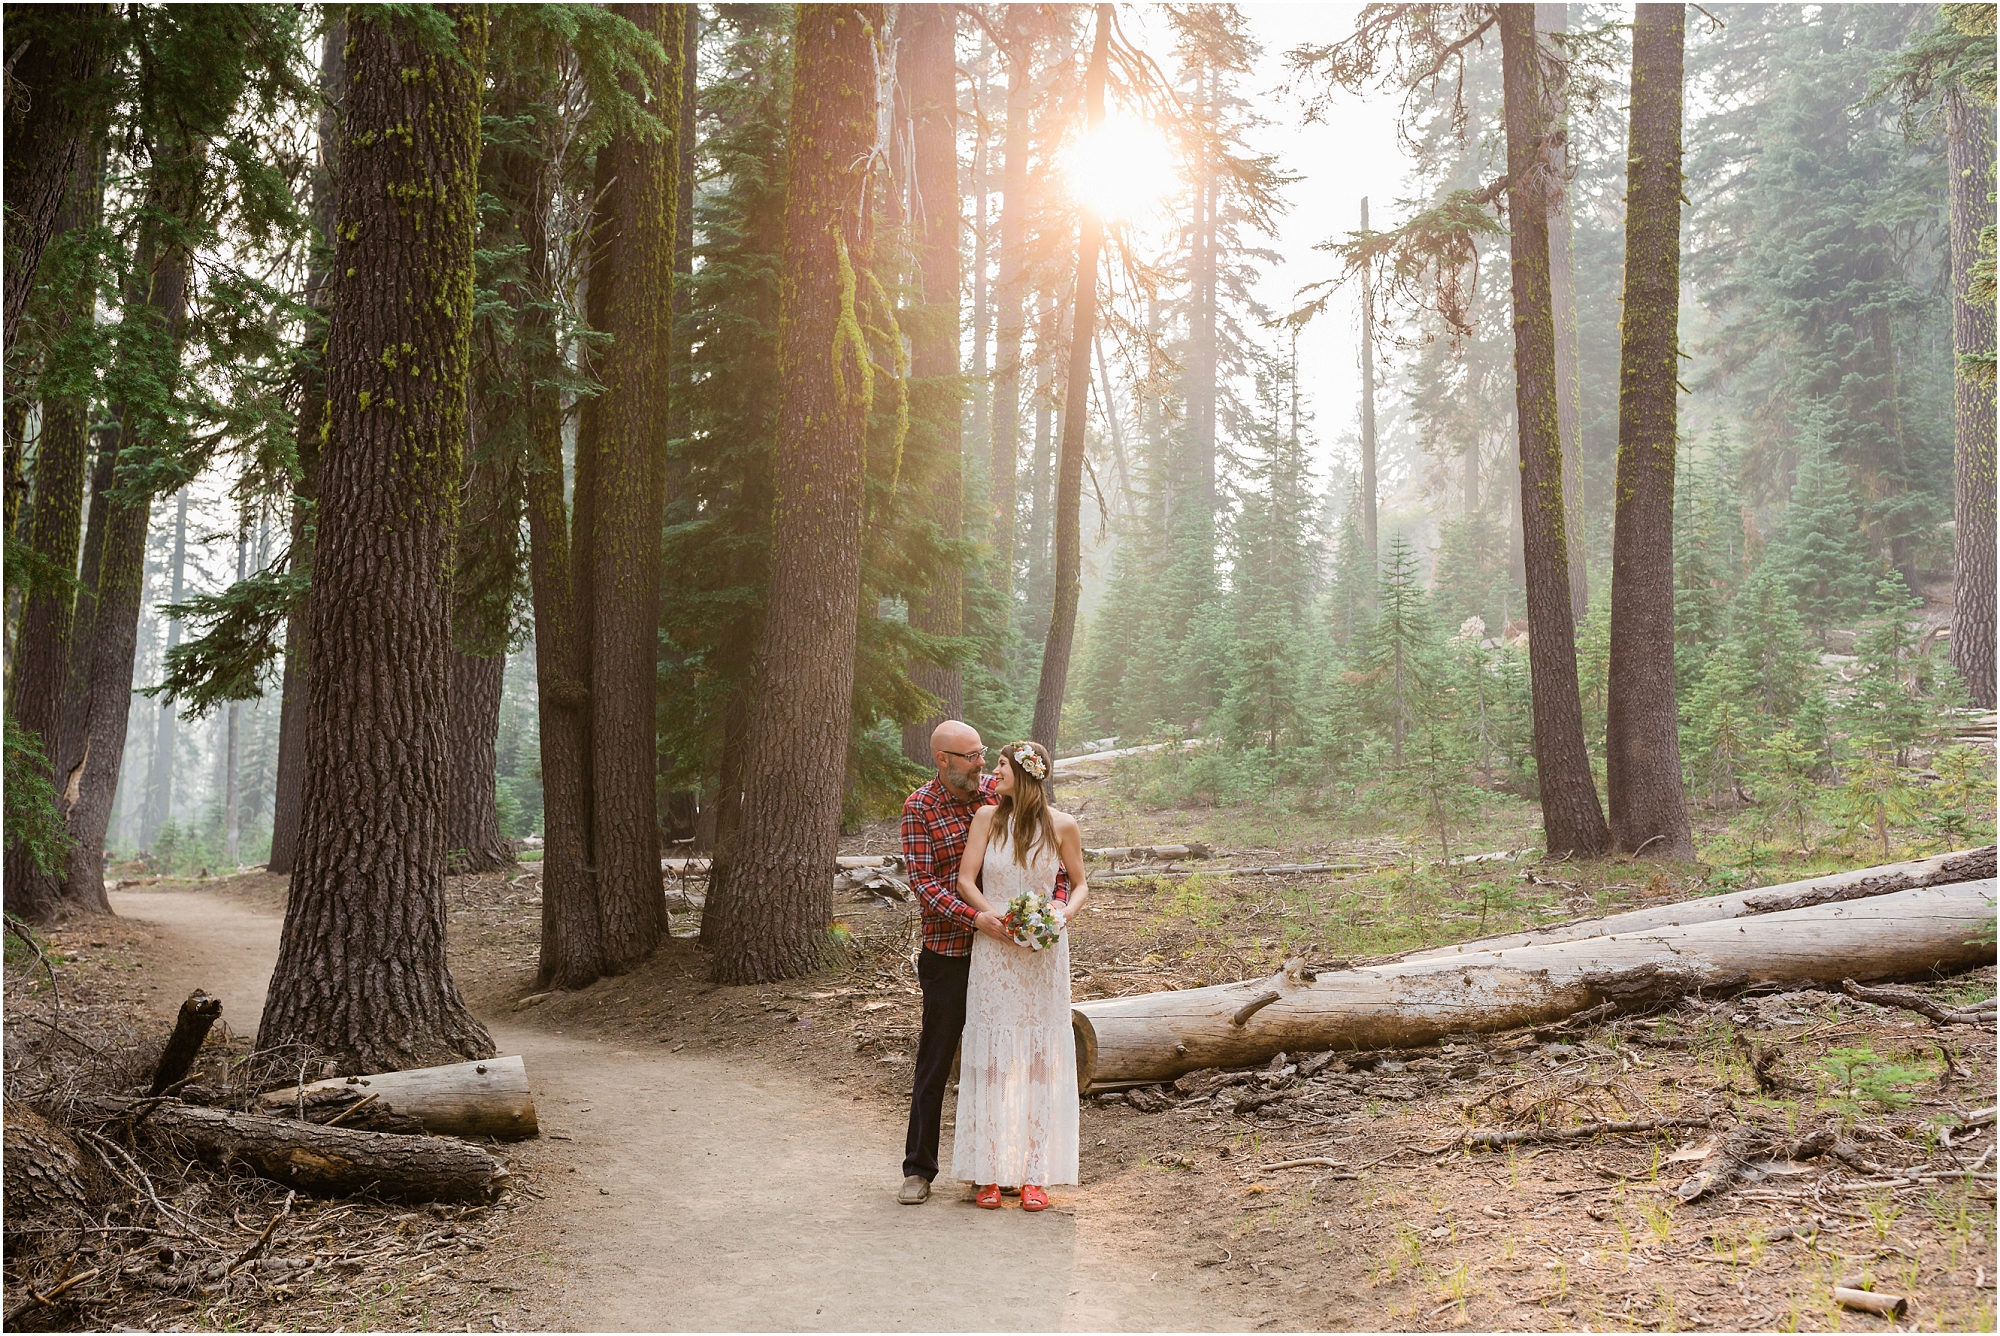 A gorgeous romantic portrait as the sun glows behind this couple posed in the tall fir trees of Crater Lake National Park in Oregon. | Erica Swantek Photography